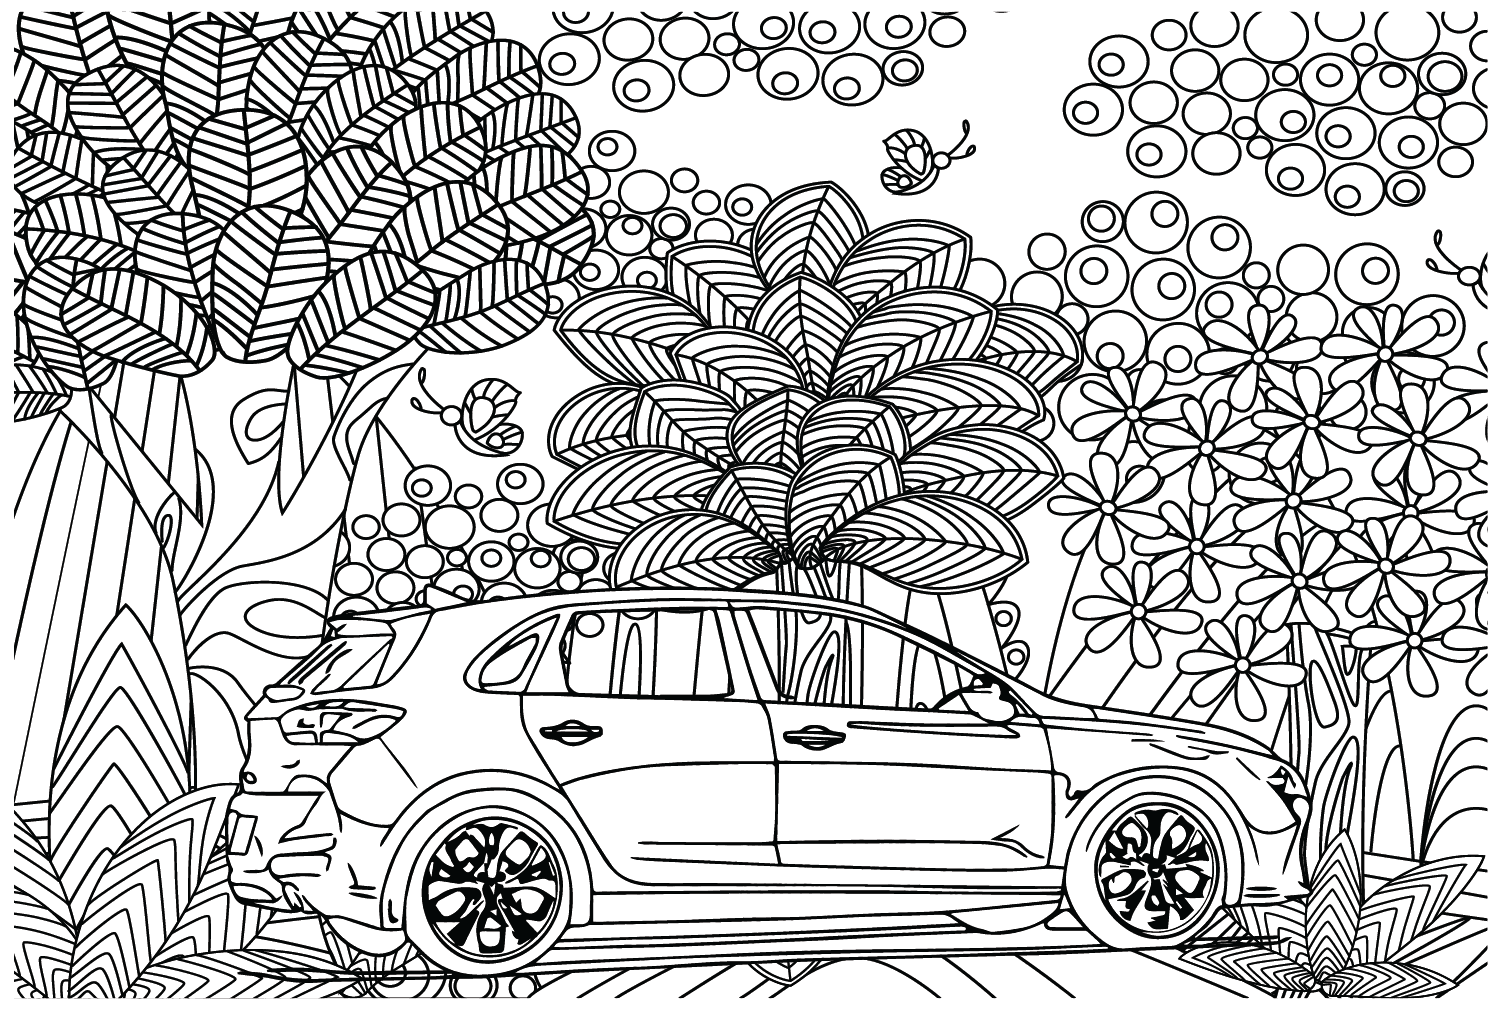 Hyundai Coloring Page for Adults - Free Printable Coloring Pages